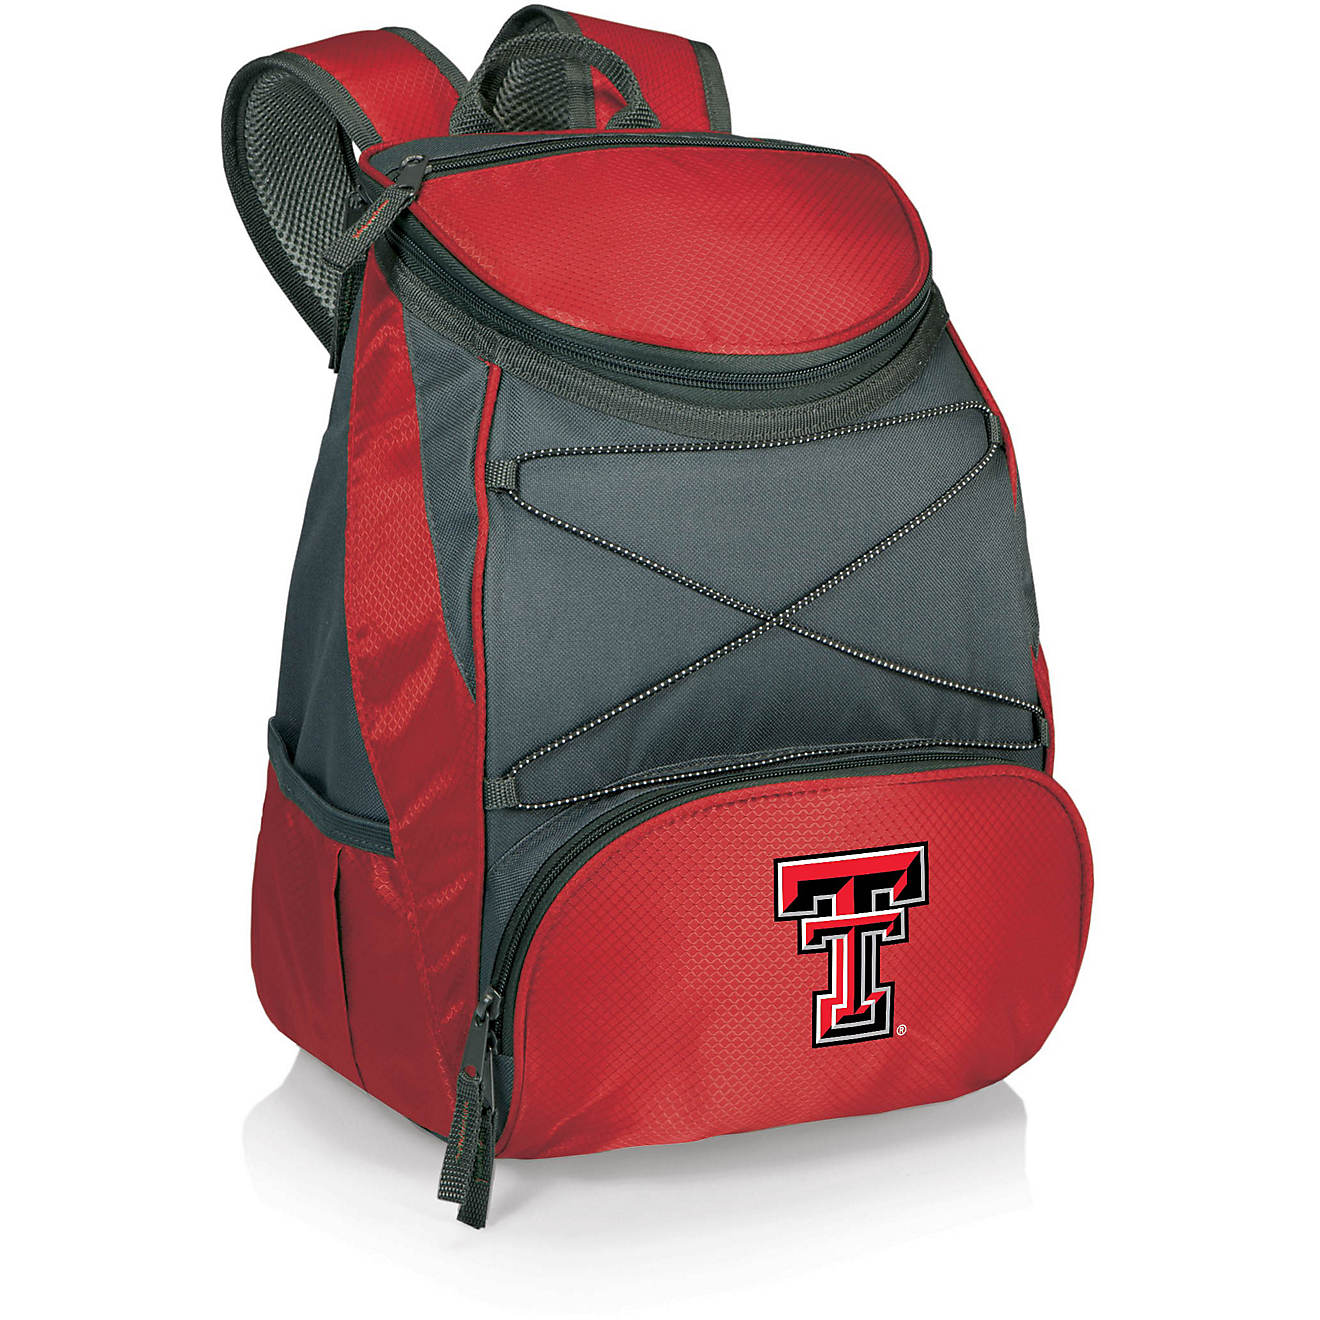 Picnic Time Texas Tech University PTX Backpack Cooler                                                                            - view number 1